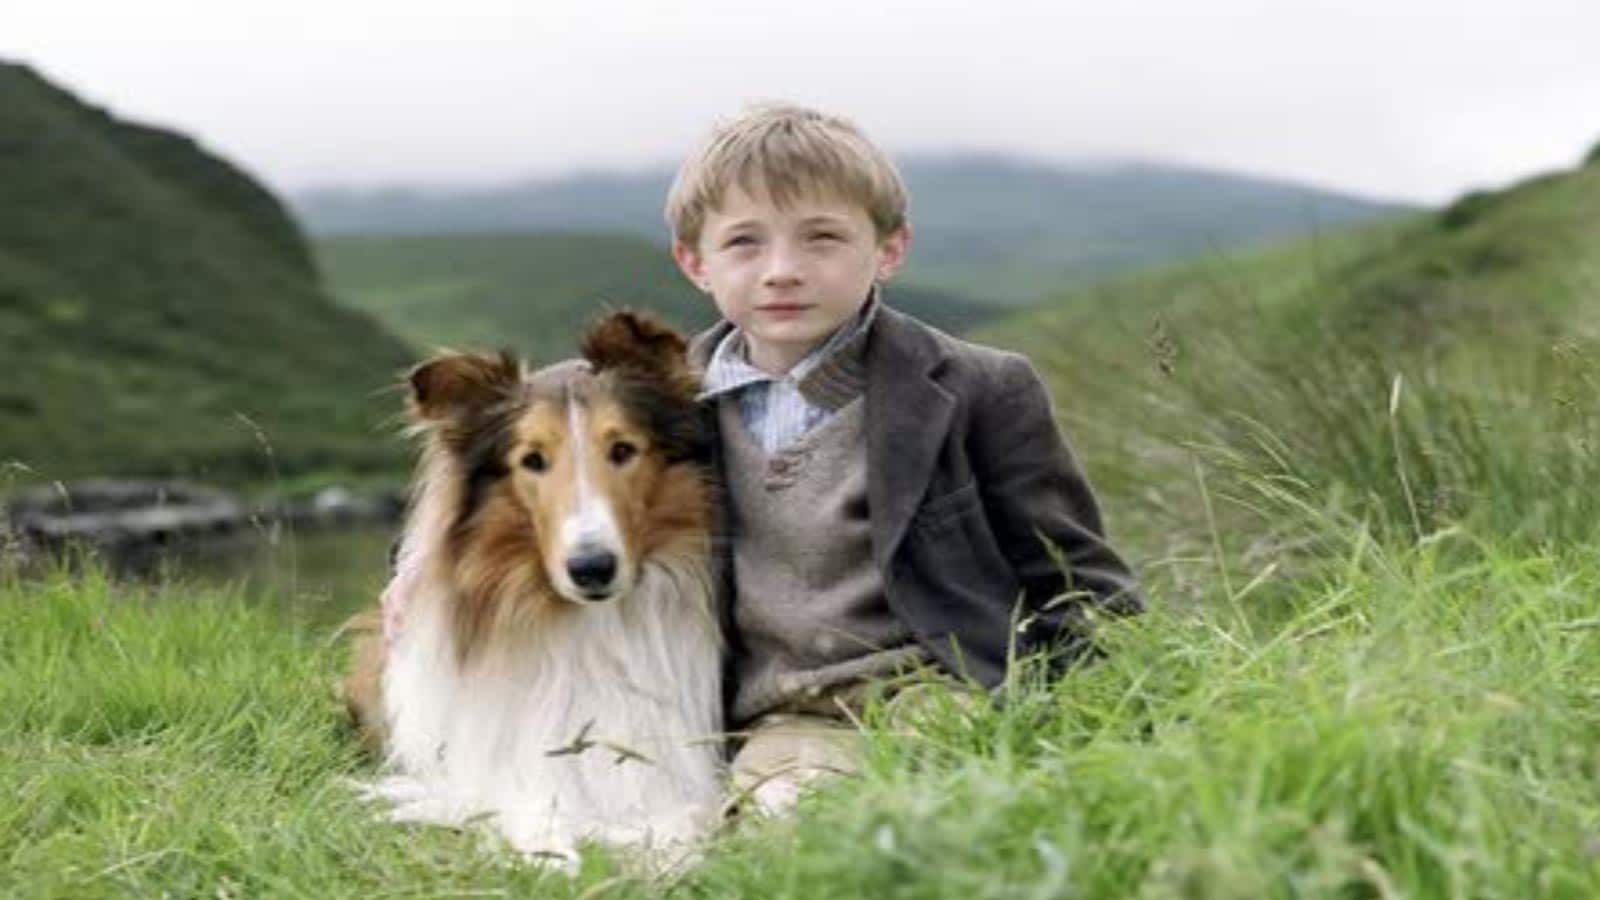 <p>By now, most people associate the name “Lassie” with the iconic collie. <em>Lassie</em>, the movie, has sentimental value for families and their beloved dogs. Lots of families are faced with hardships or big life changes where they are forced to get rid of their pets. It can be a sad part of owning a pet.</p> <p>Well, we warned you. If you love dogs, you should probably skip these flicks.</p> <p><strong>READ MORE FROM WEALTH OF GEEKS:</strong></p>